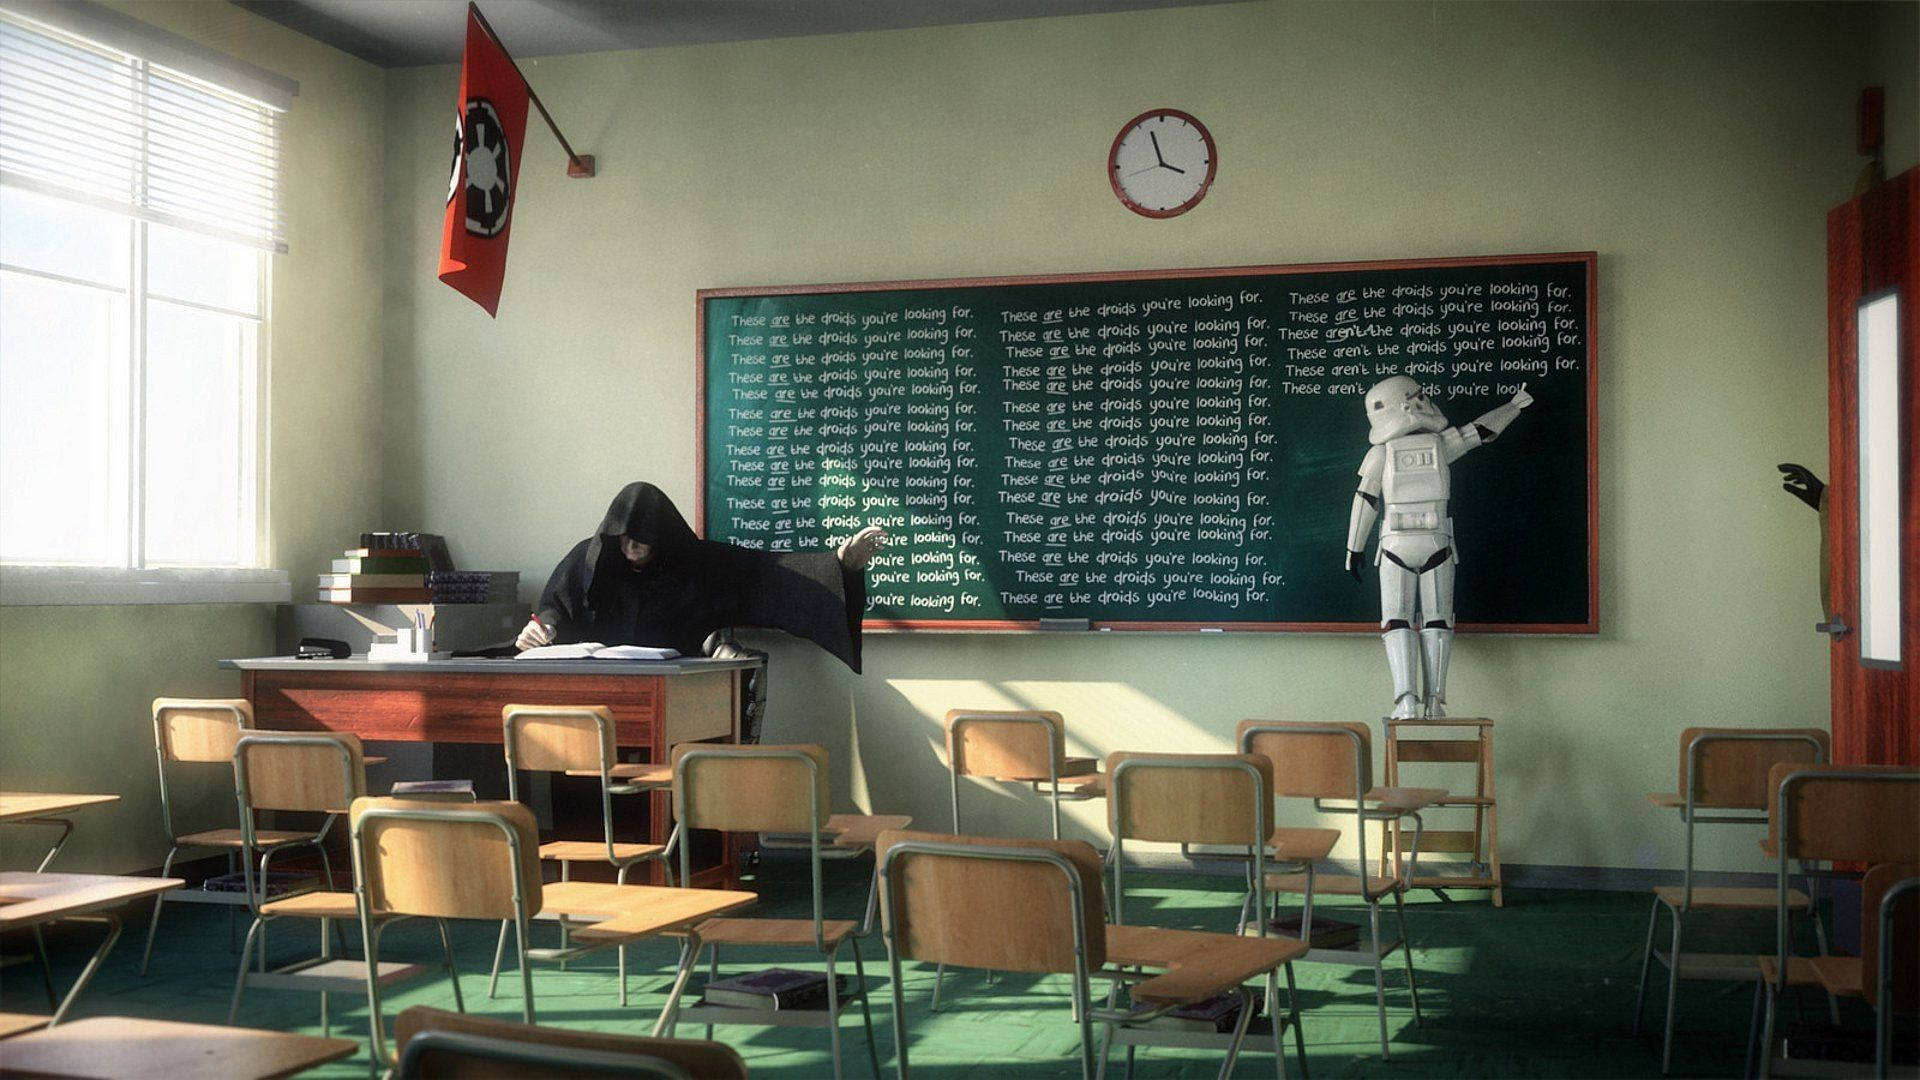 Star Wars Characters In A Classroom